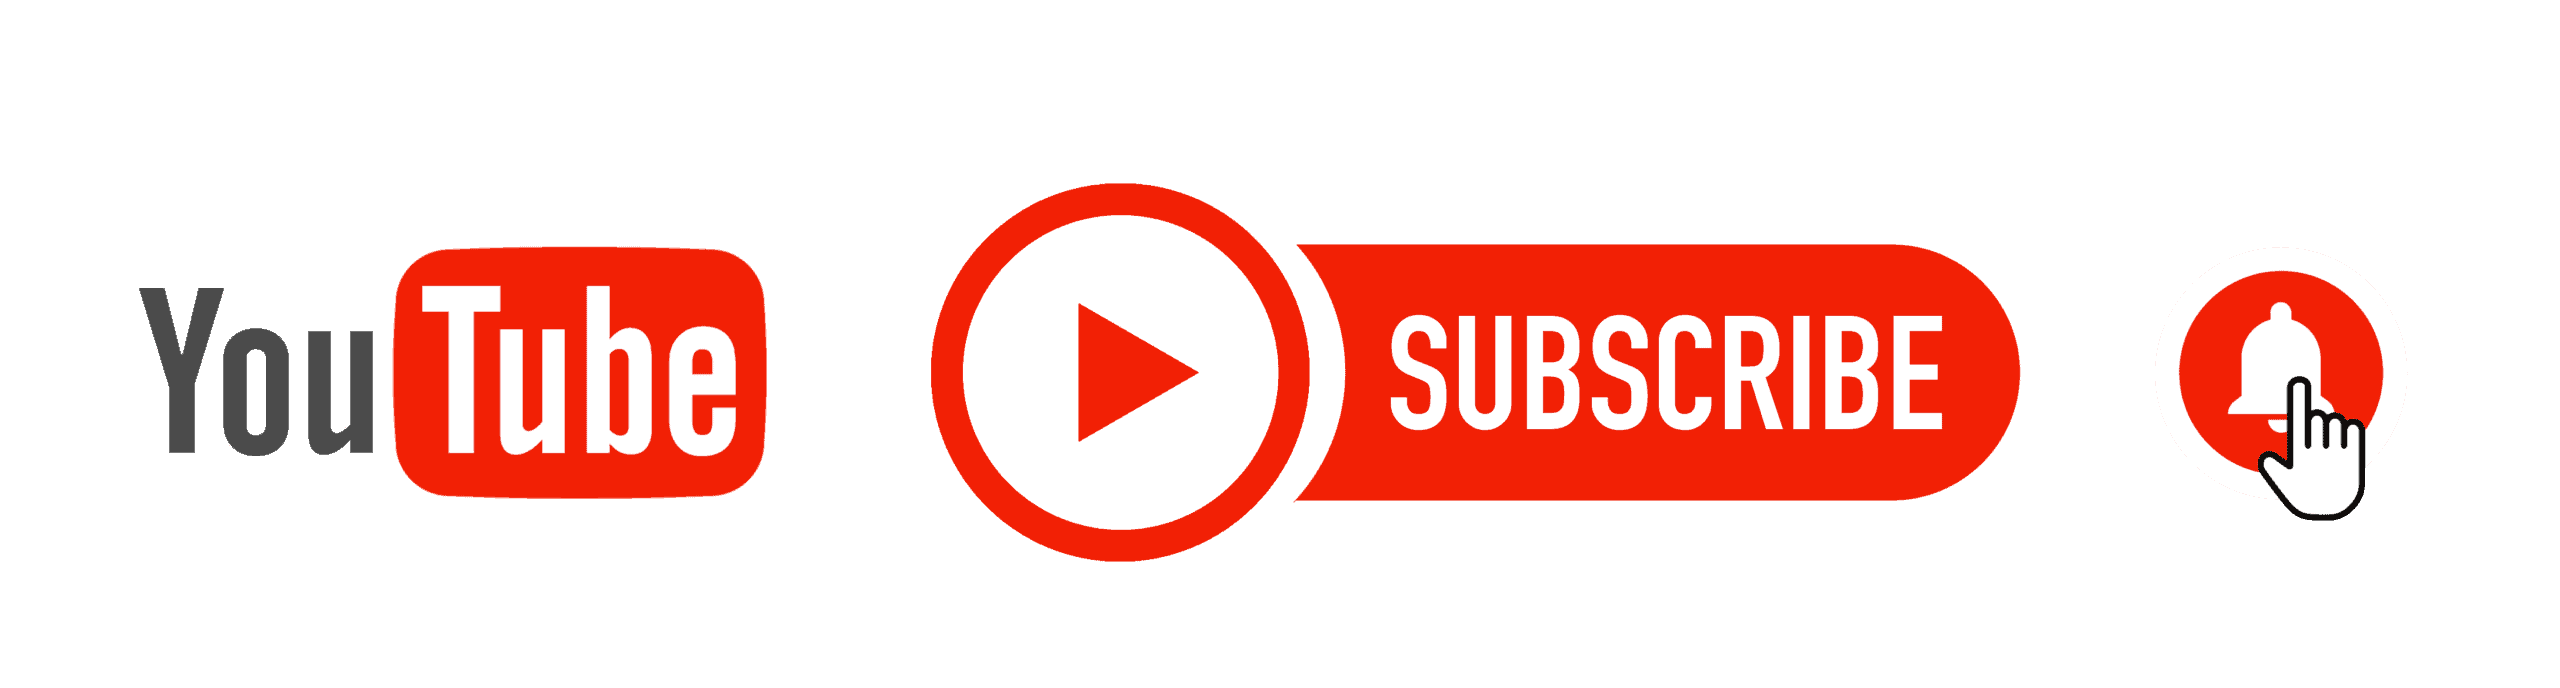 Citypng.comhd Youtube Logo Subscribe Button With Bell Icon Png 4352x1170 1